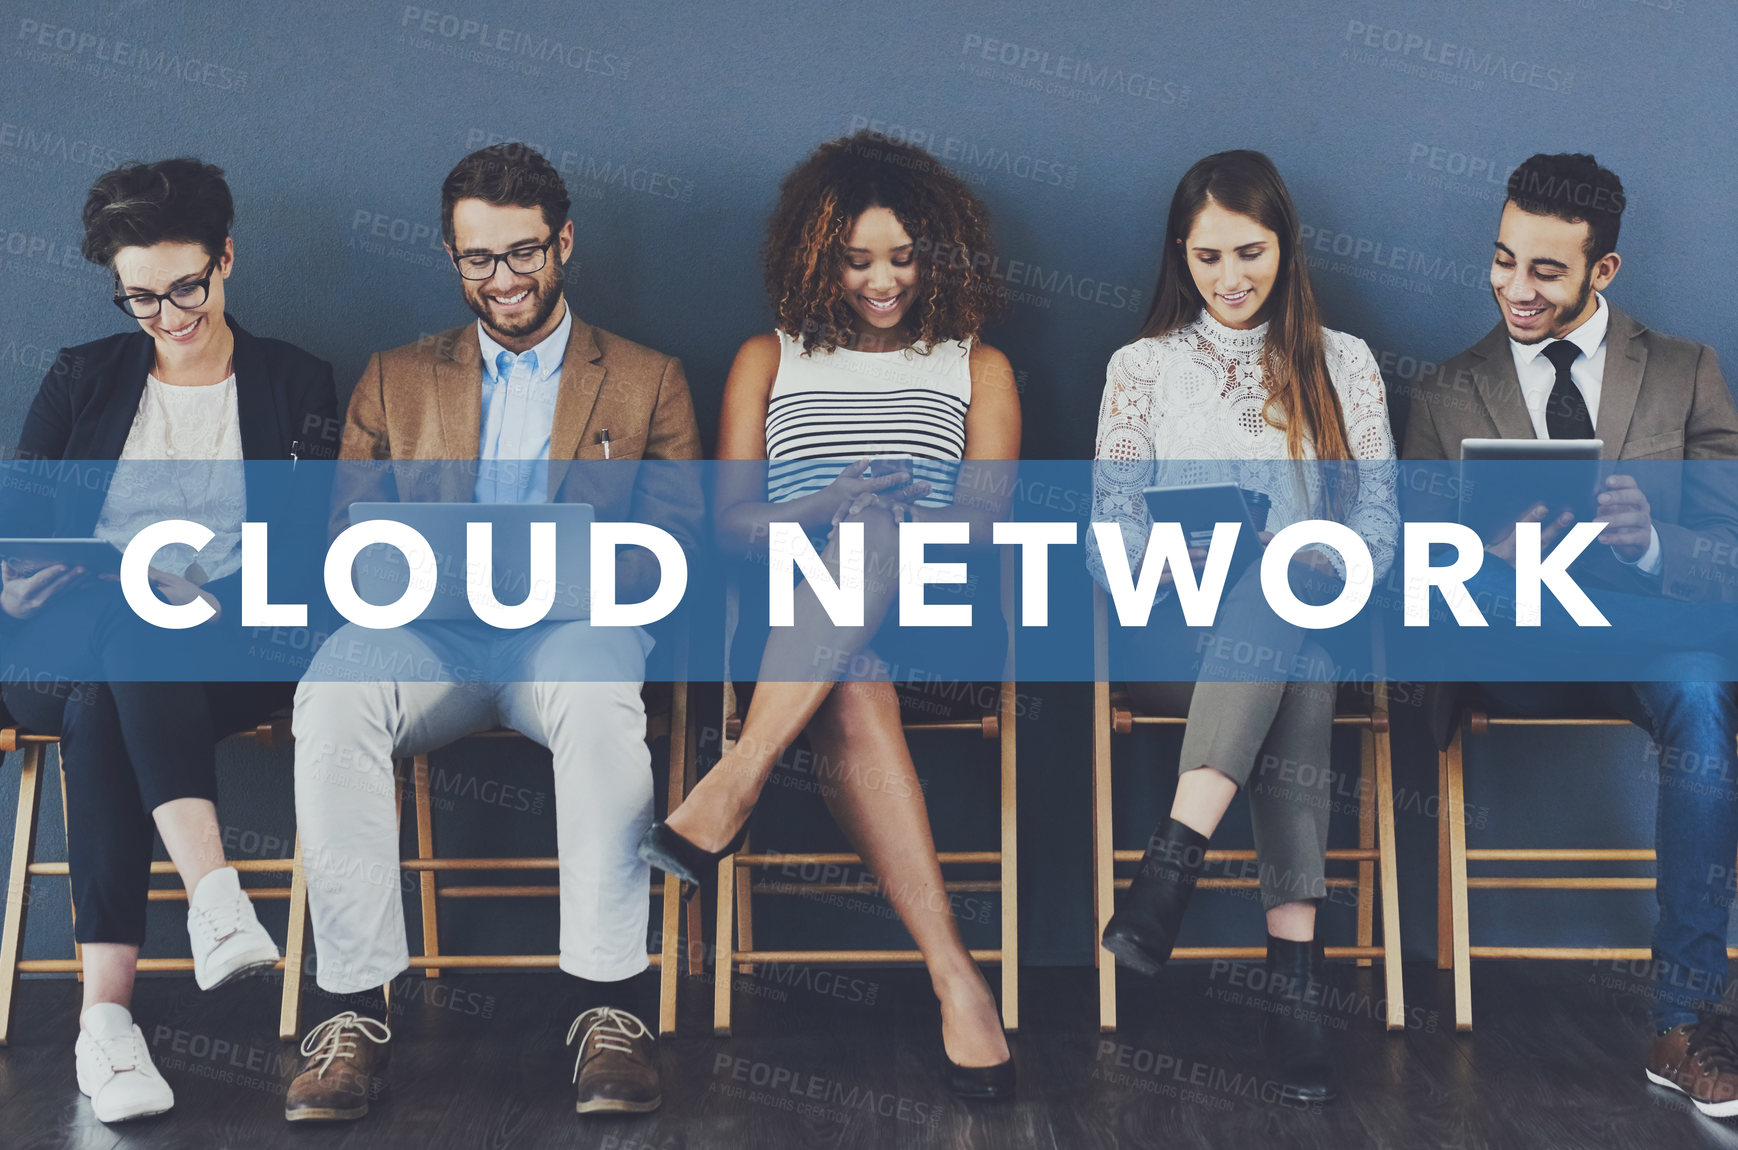 Buy stock photo Studio shot of businesspeople using wireless technology with the words cloud network superimposed over them against a gray background